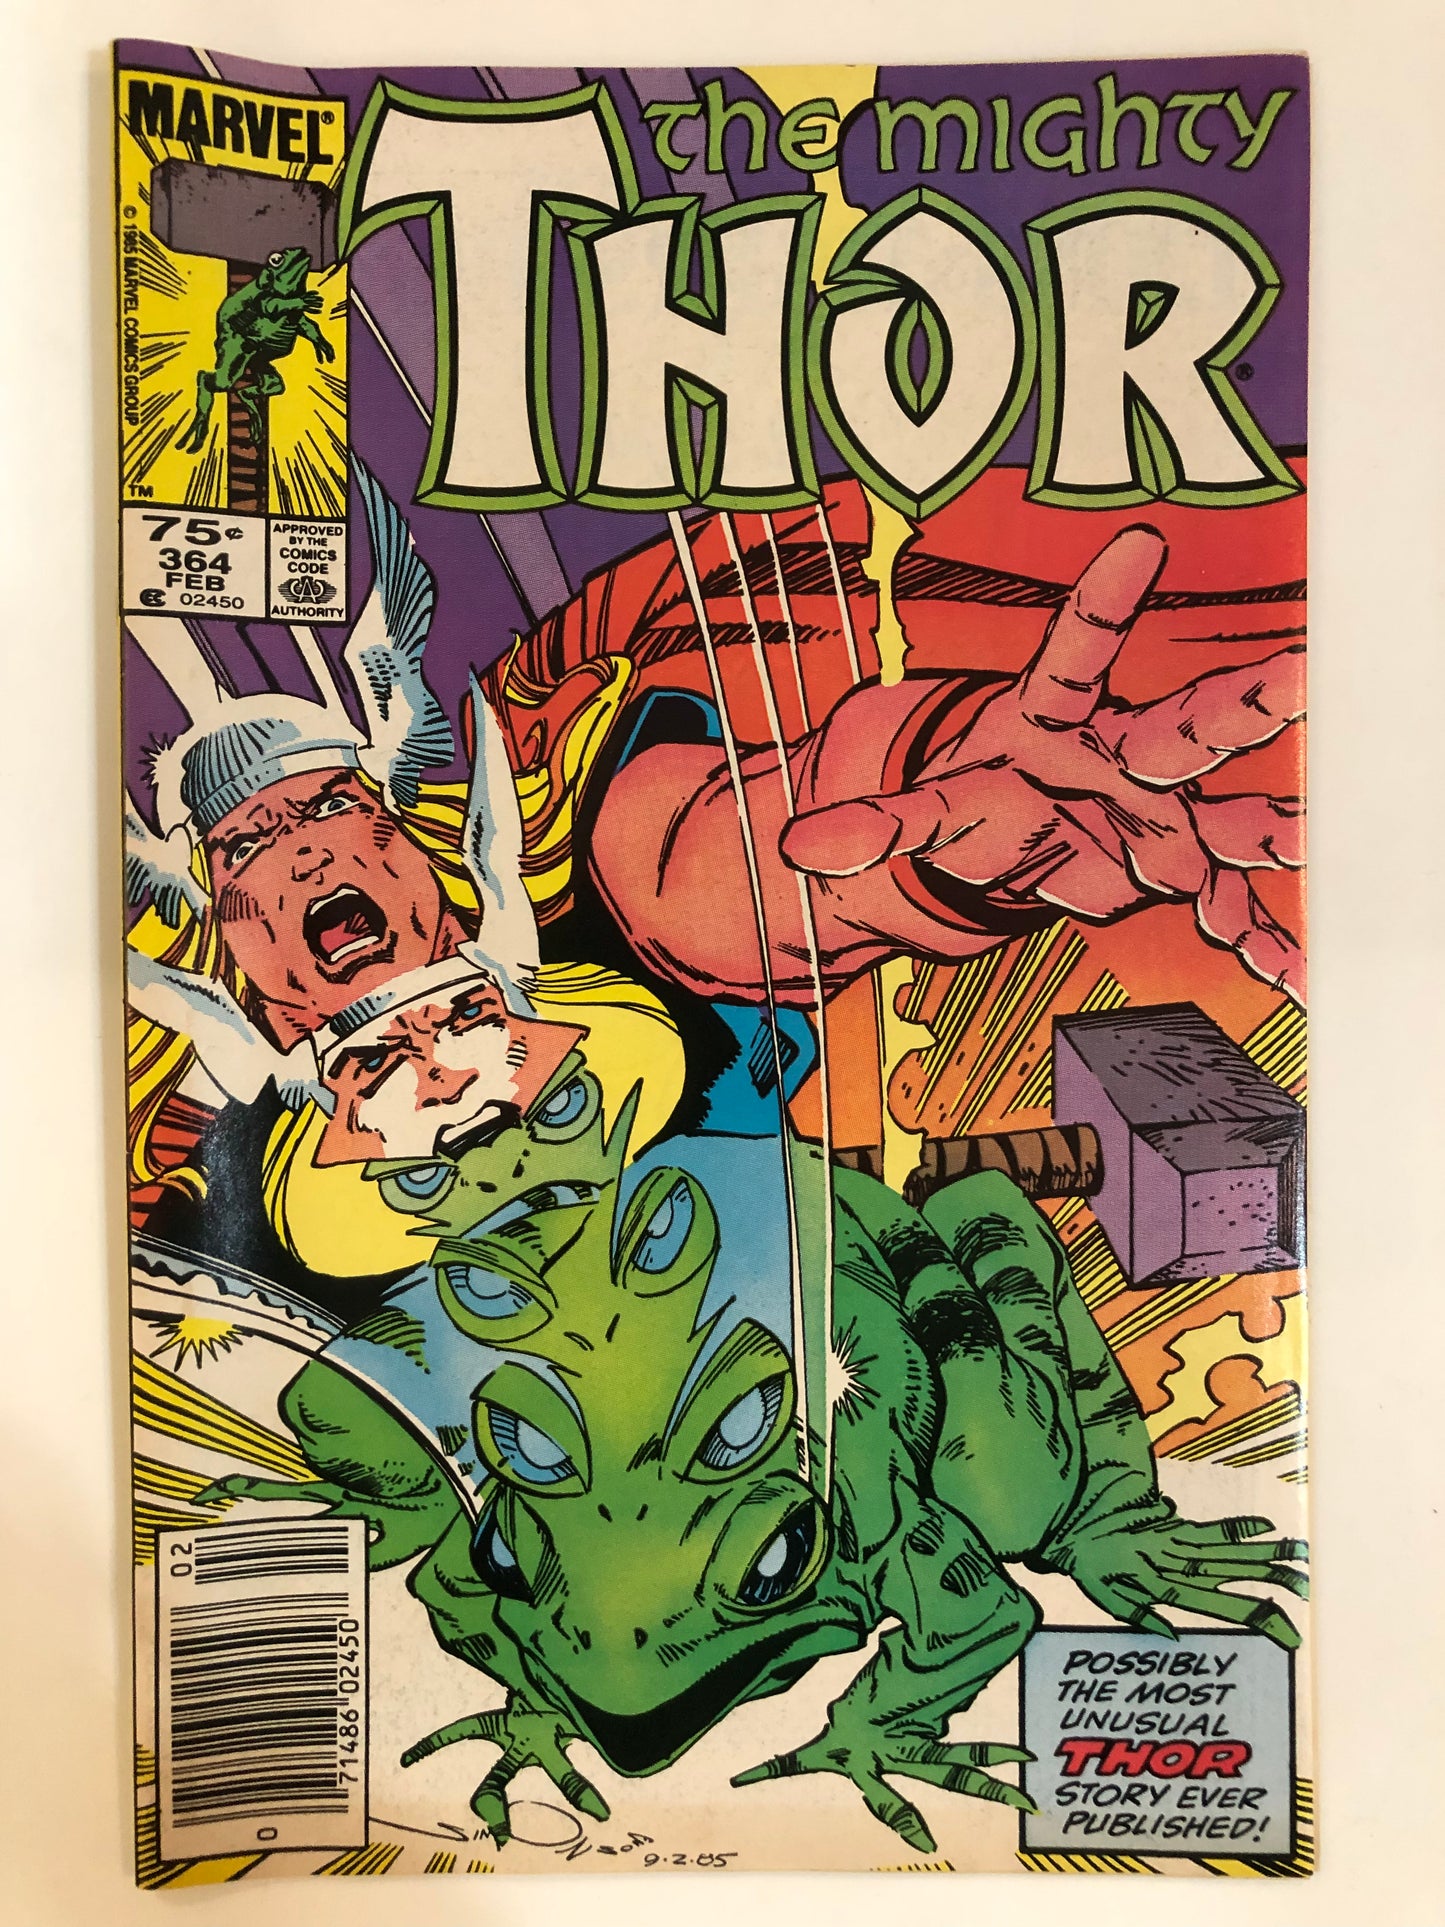 The Mighty Thor #364